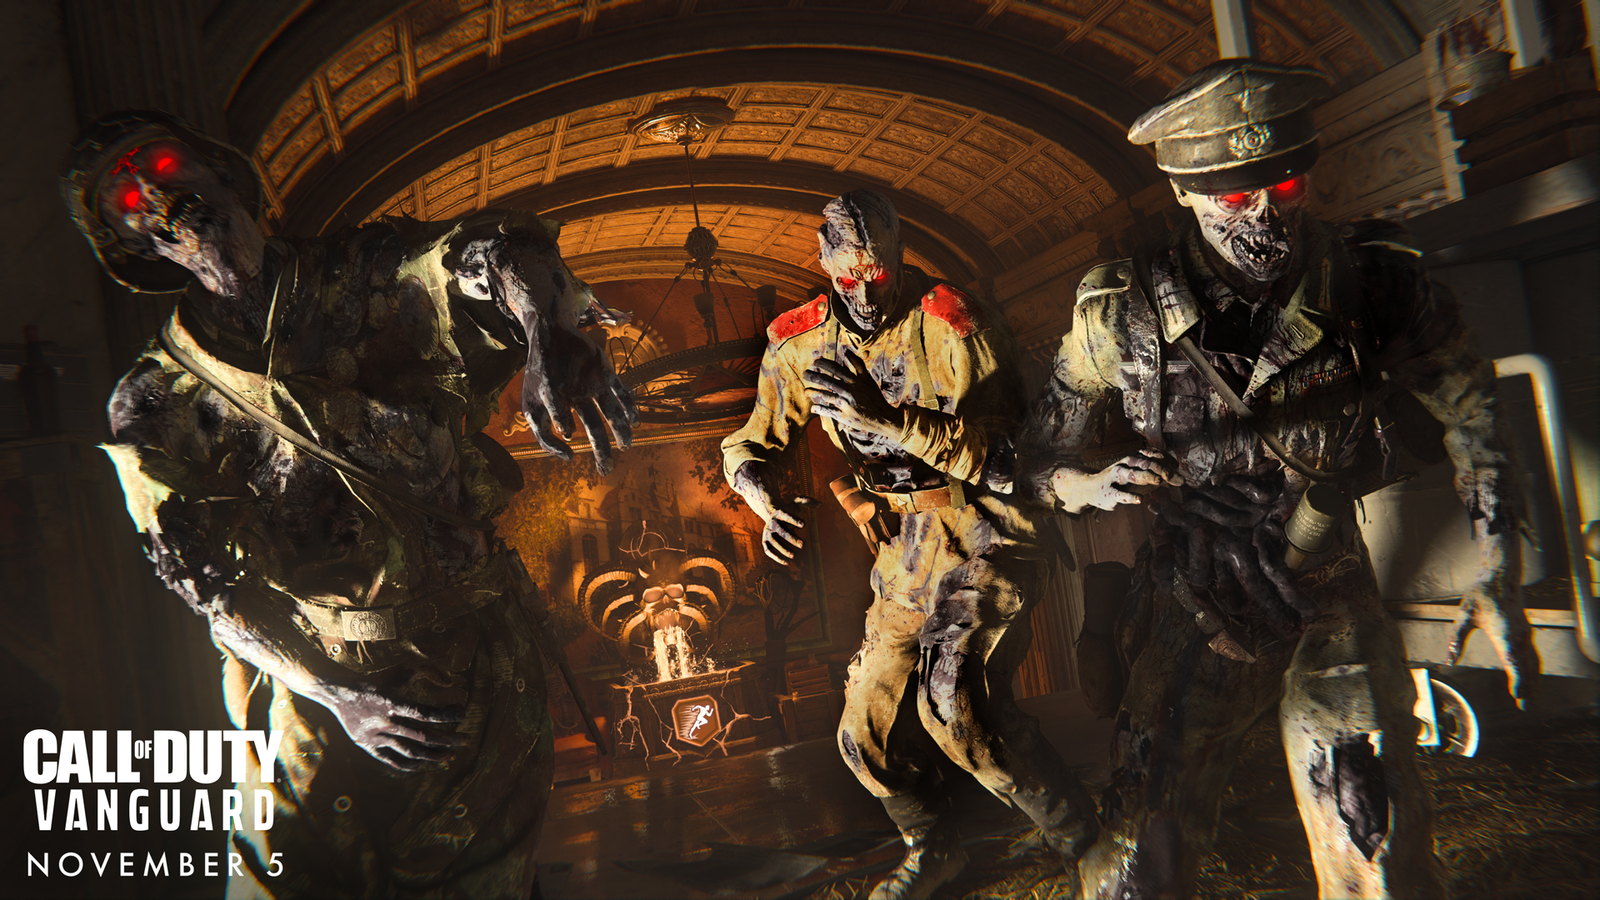 Call of Duty: Vanguard Zombies Adding Long-Awaited Feature Soon